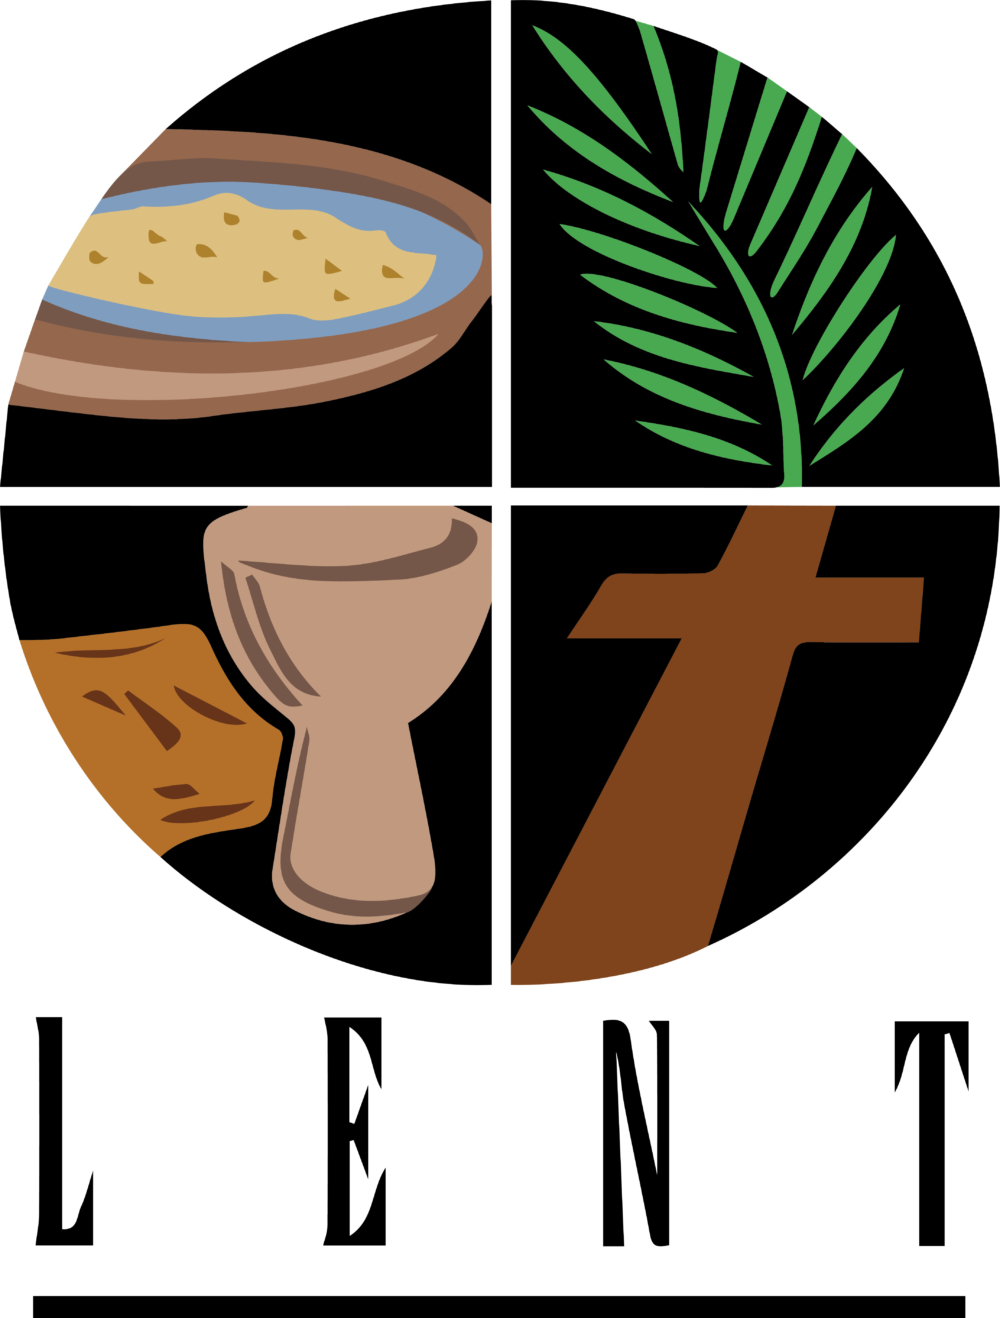 5th Sunday in Lent Image